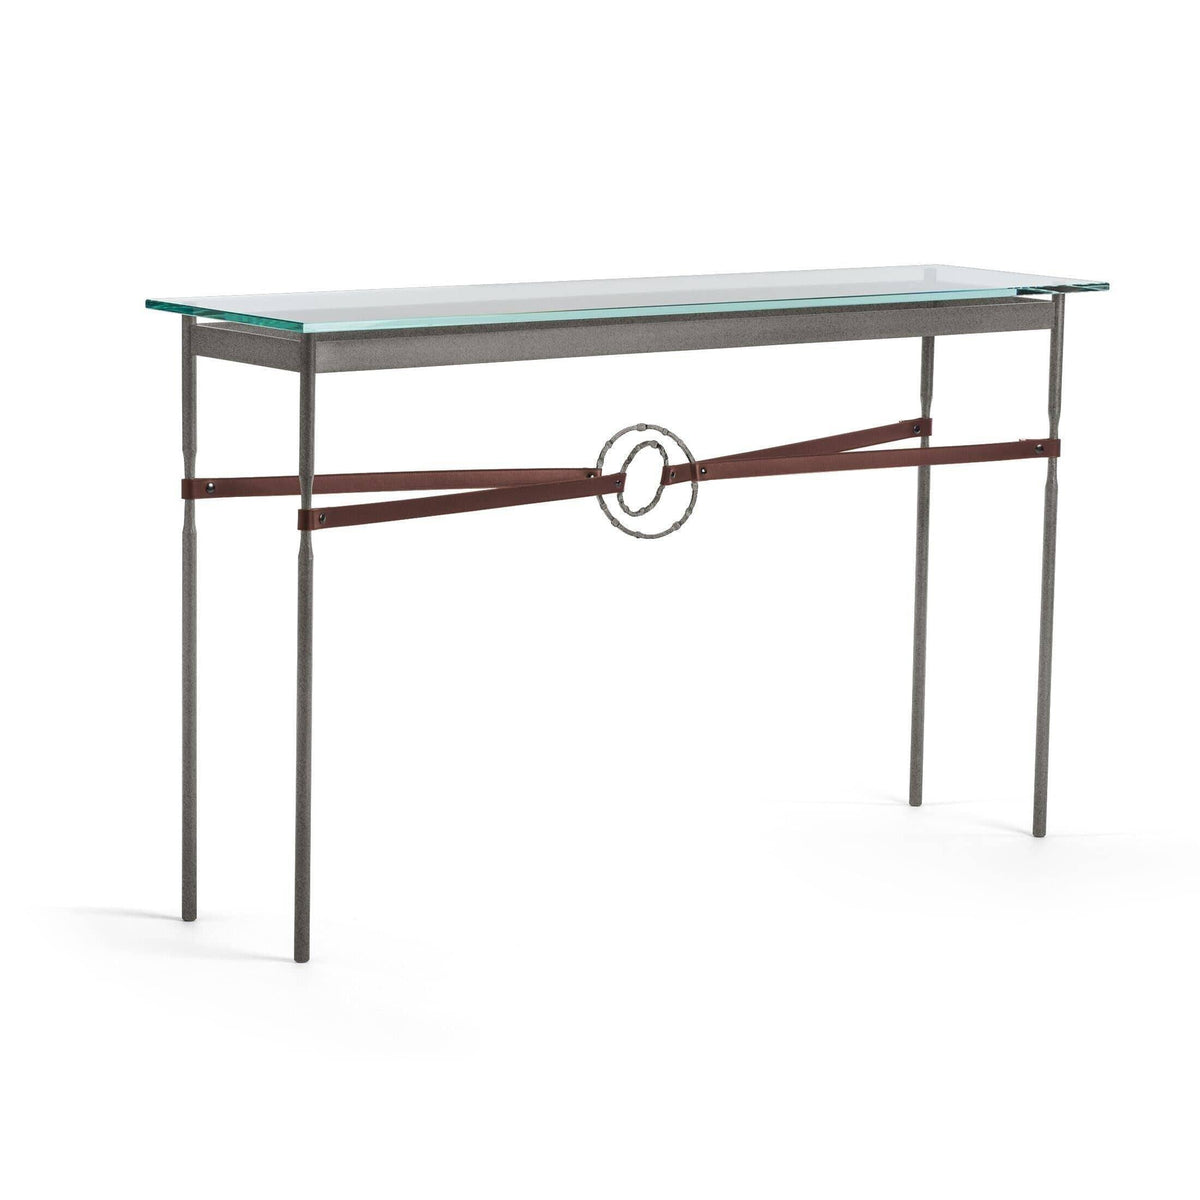 Hubbardton Forge - Equus Brown Leather Console Table - 750118-20-20-LB-VA0714 | Montreal Lighting & Hardware